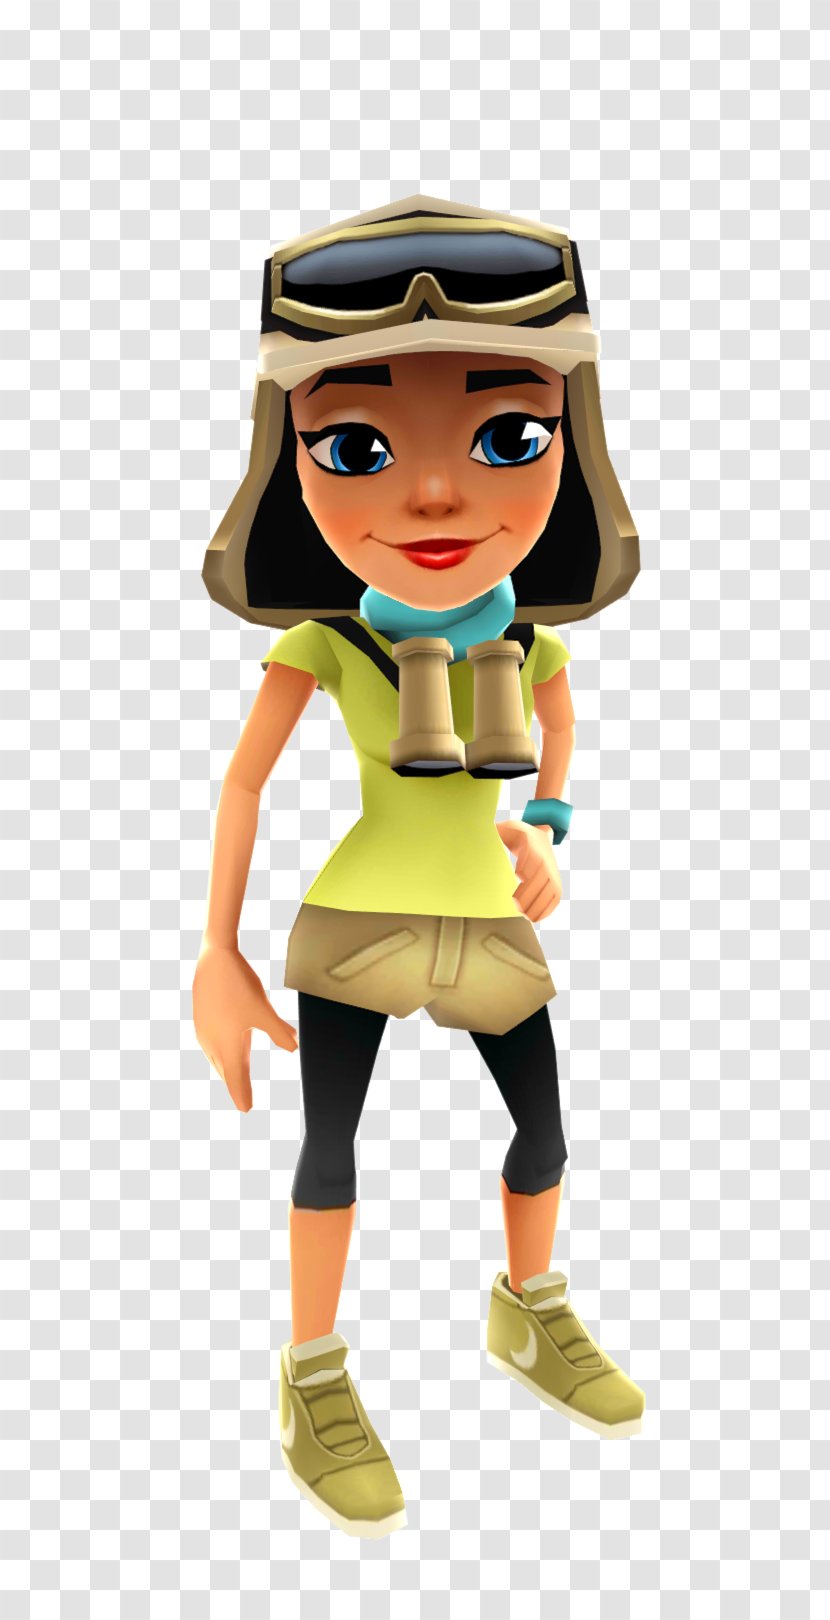 Subway Surfers Android Game Character - Harumi Transparent PNG